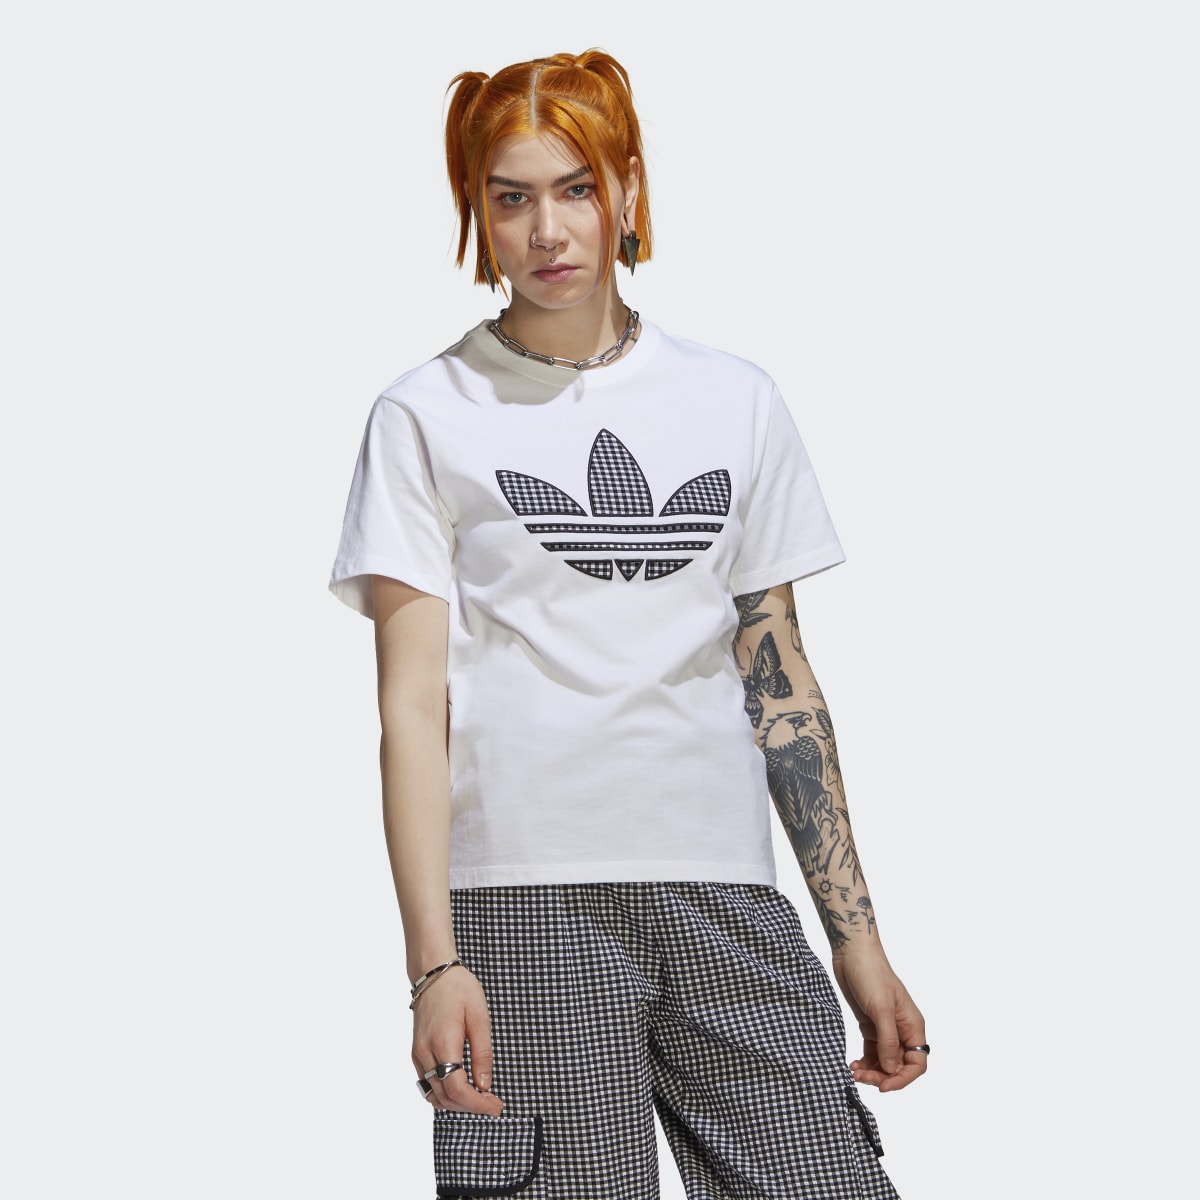 Adidas T-shirt with Trefoil Application. 5